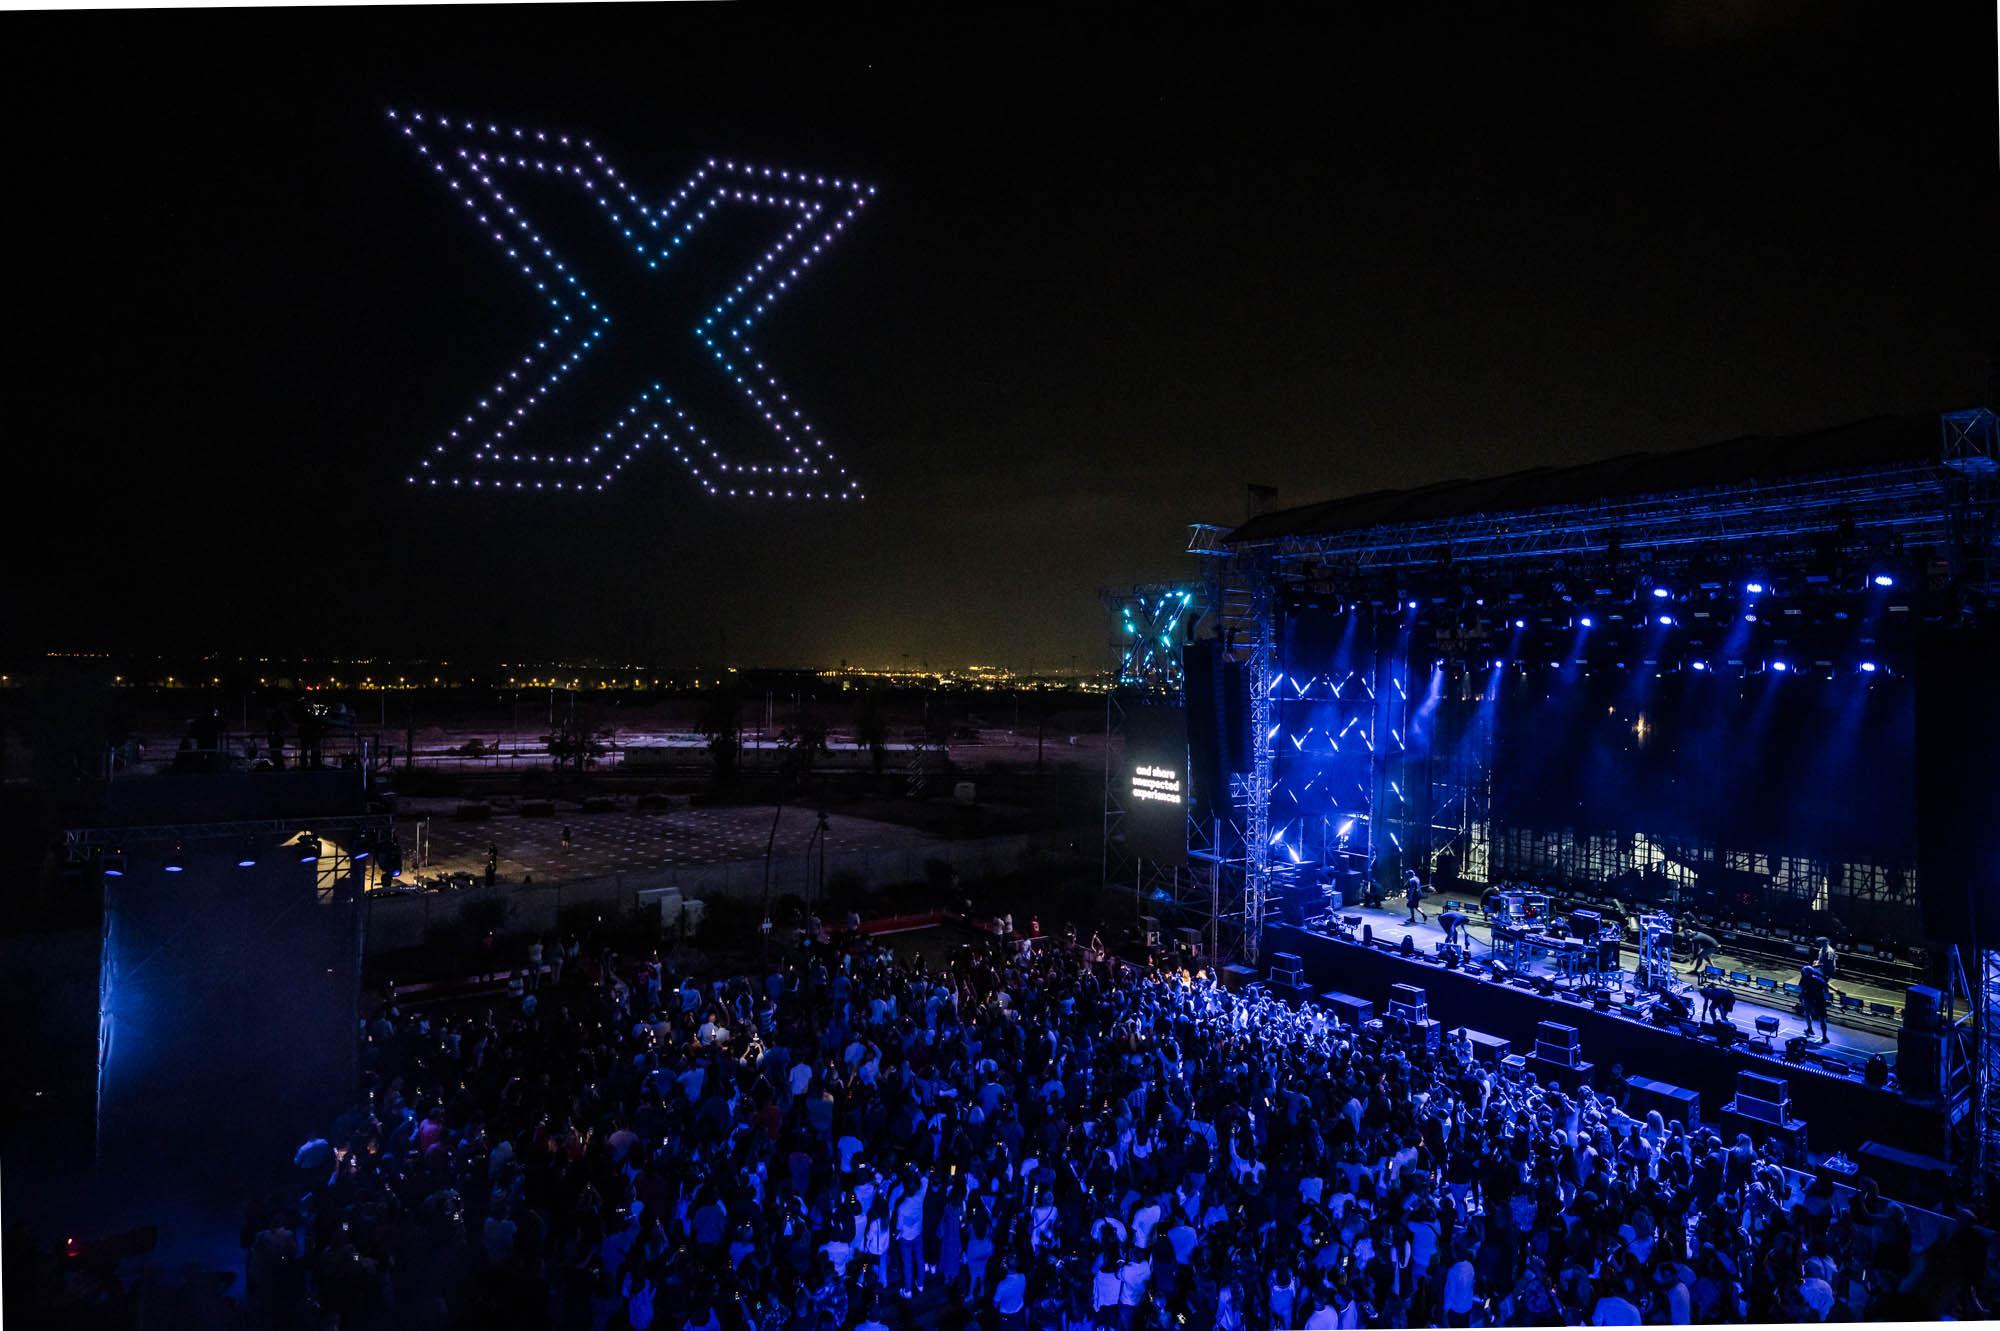 Drones that paint a virtual X in the air with lights at the Together X Event by Battle Royal Studios